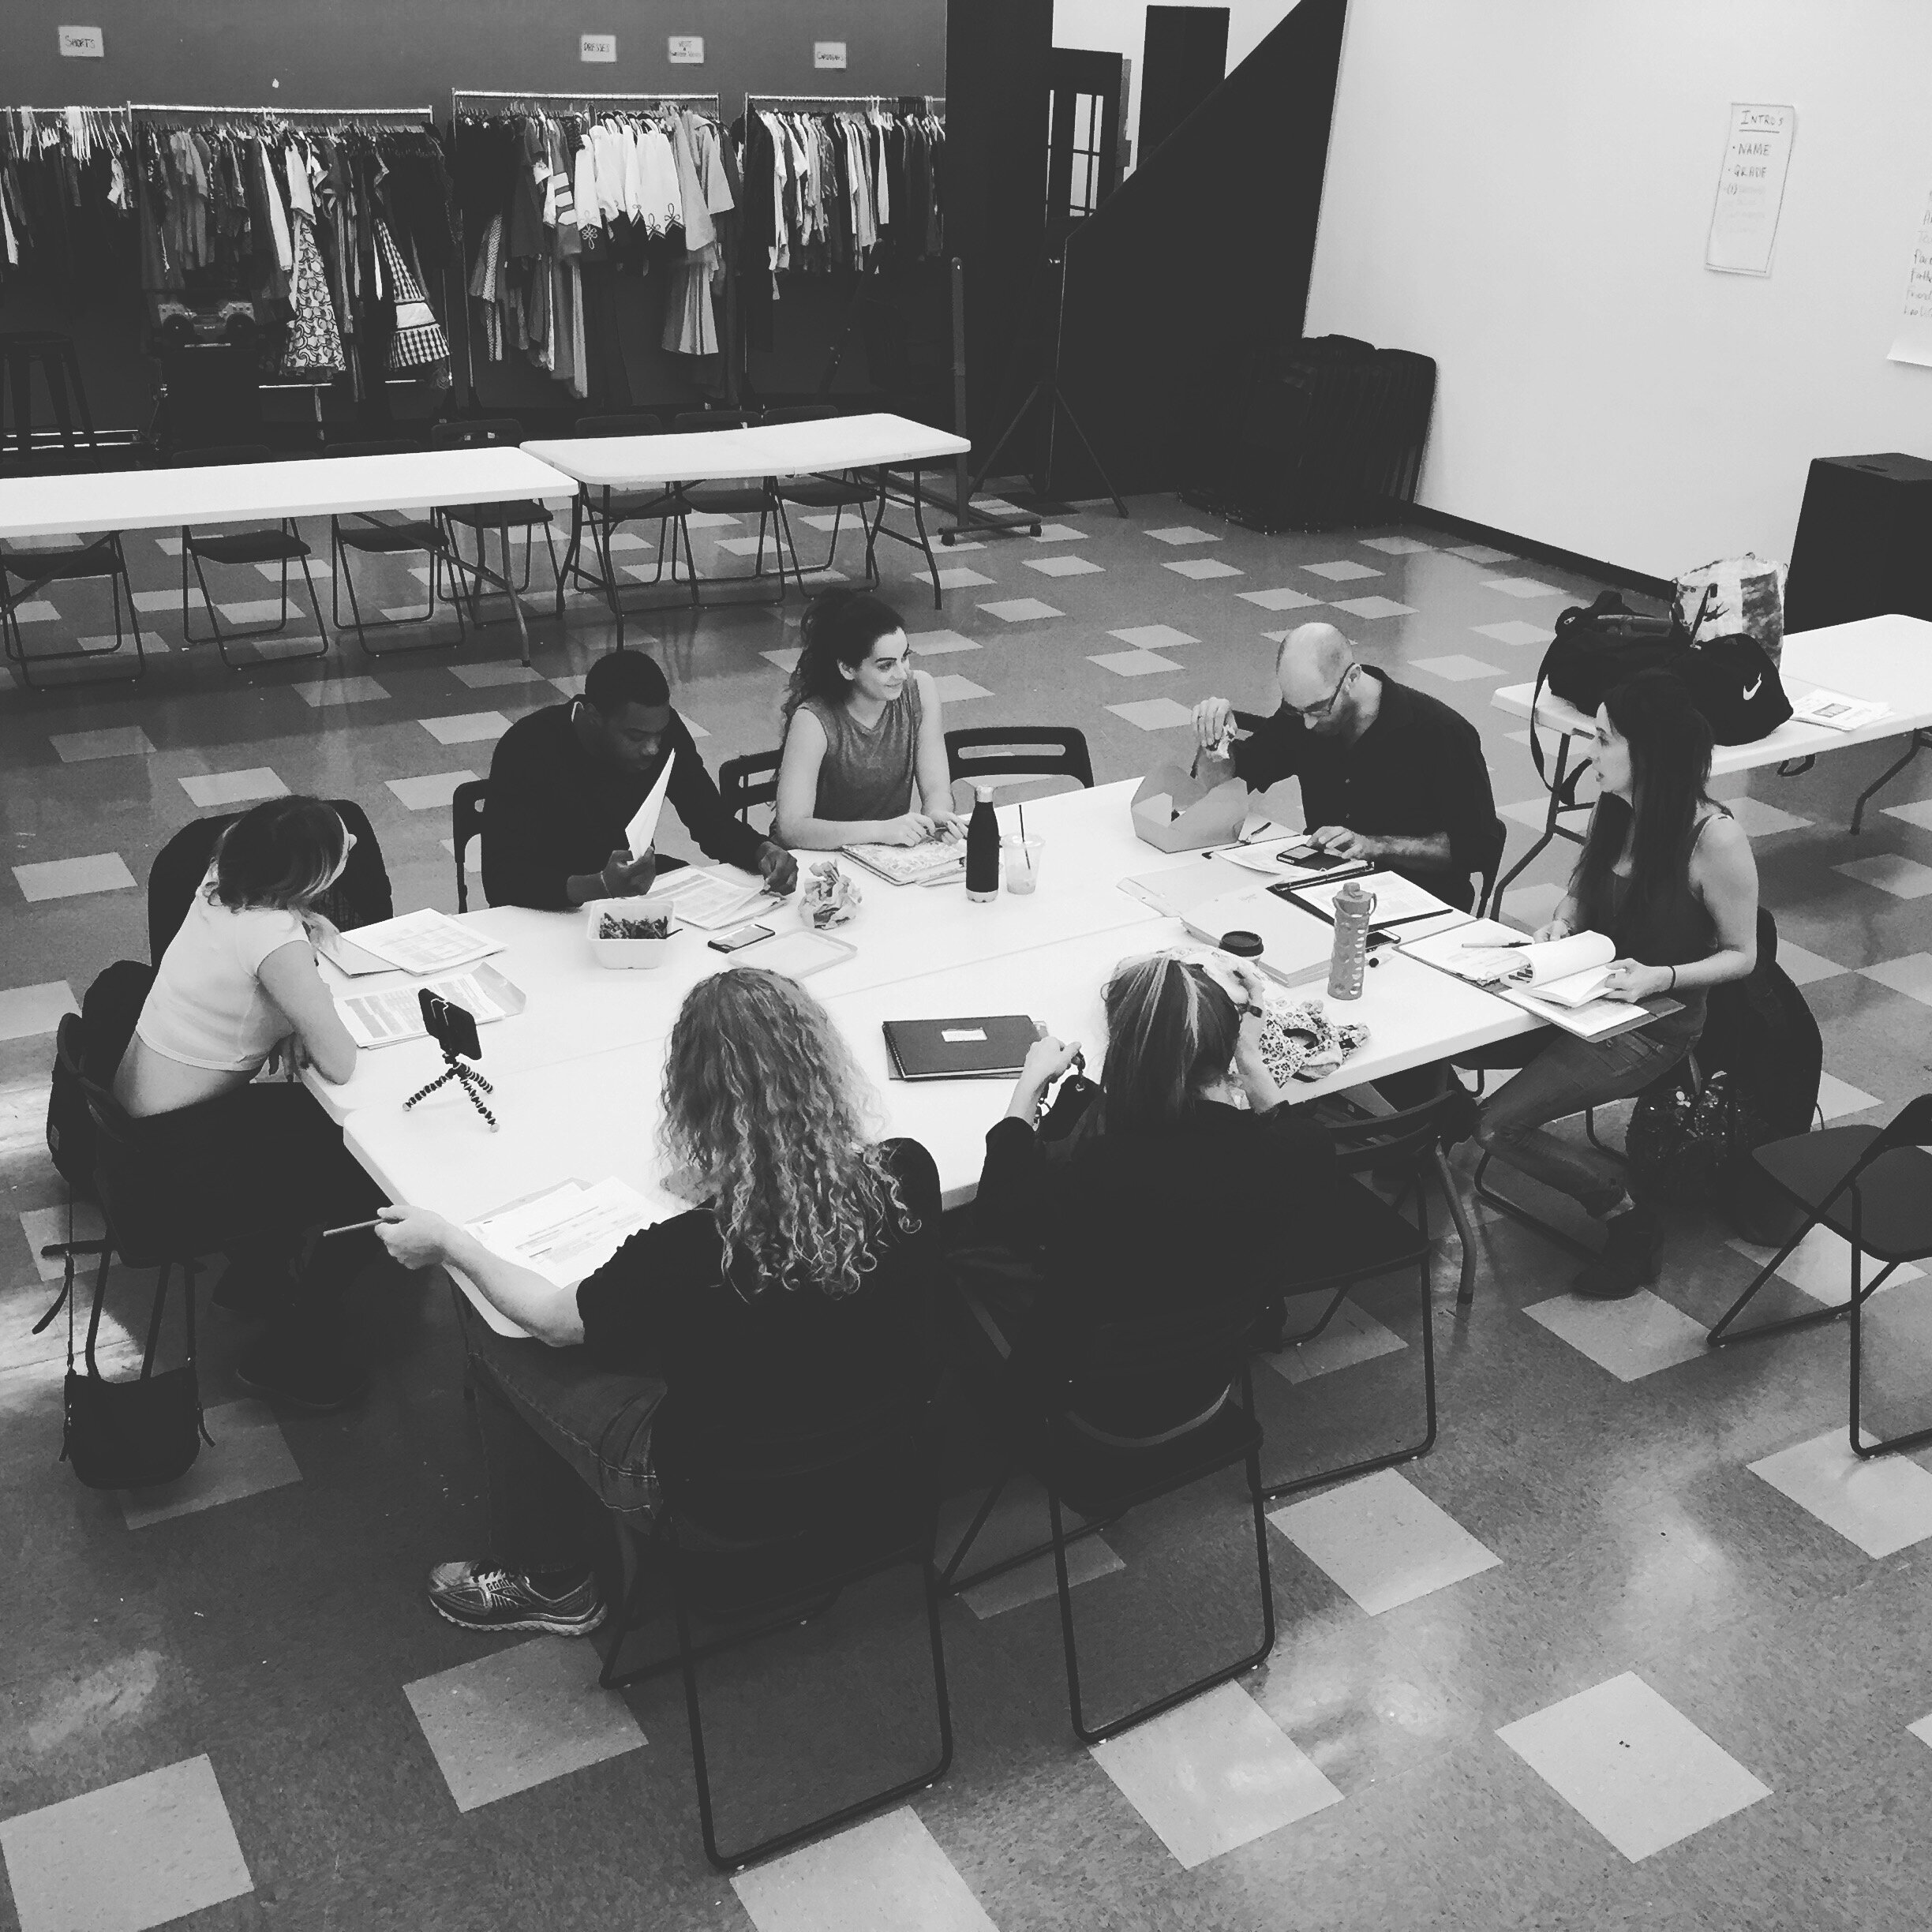 NOVEMBER 10TH, 2016 - "PARADISE LOST" FIRST READ-THROUGH